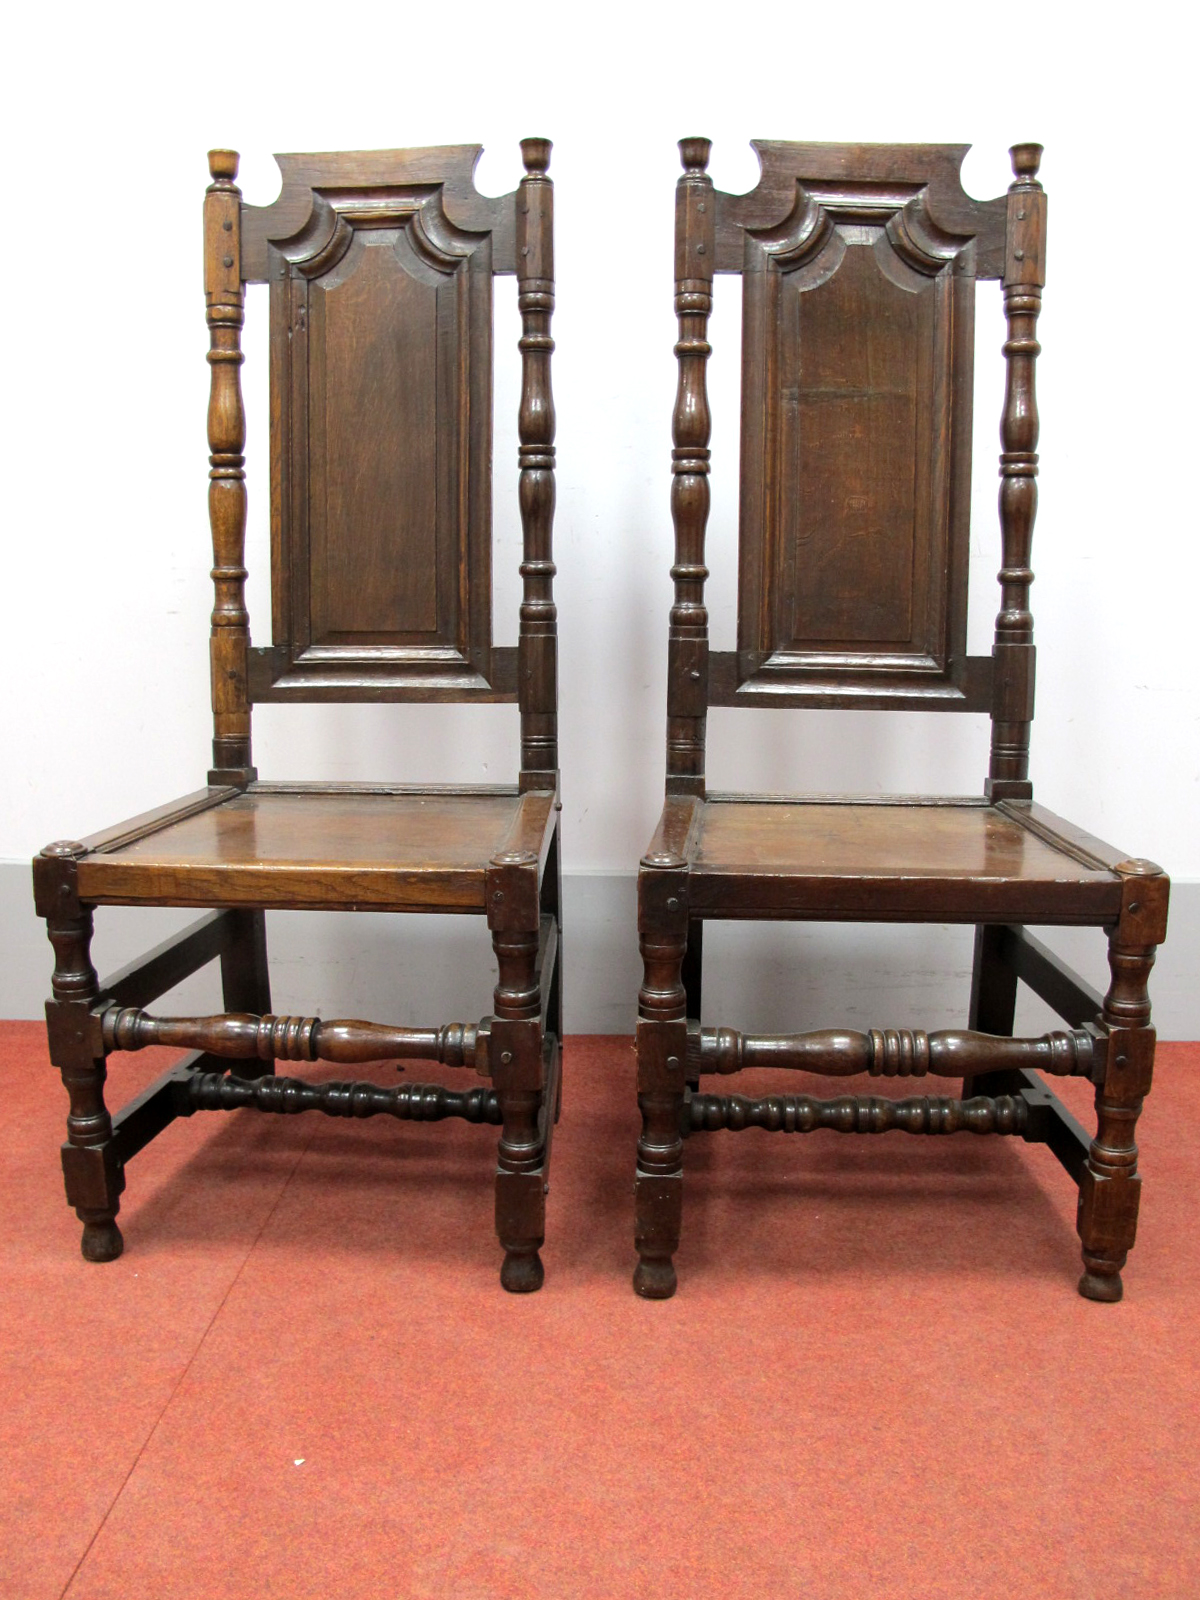 A Pair of XVII Century and Later Joined Oak Chairs, with flat top rails, turned finials, arched